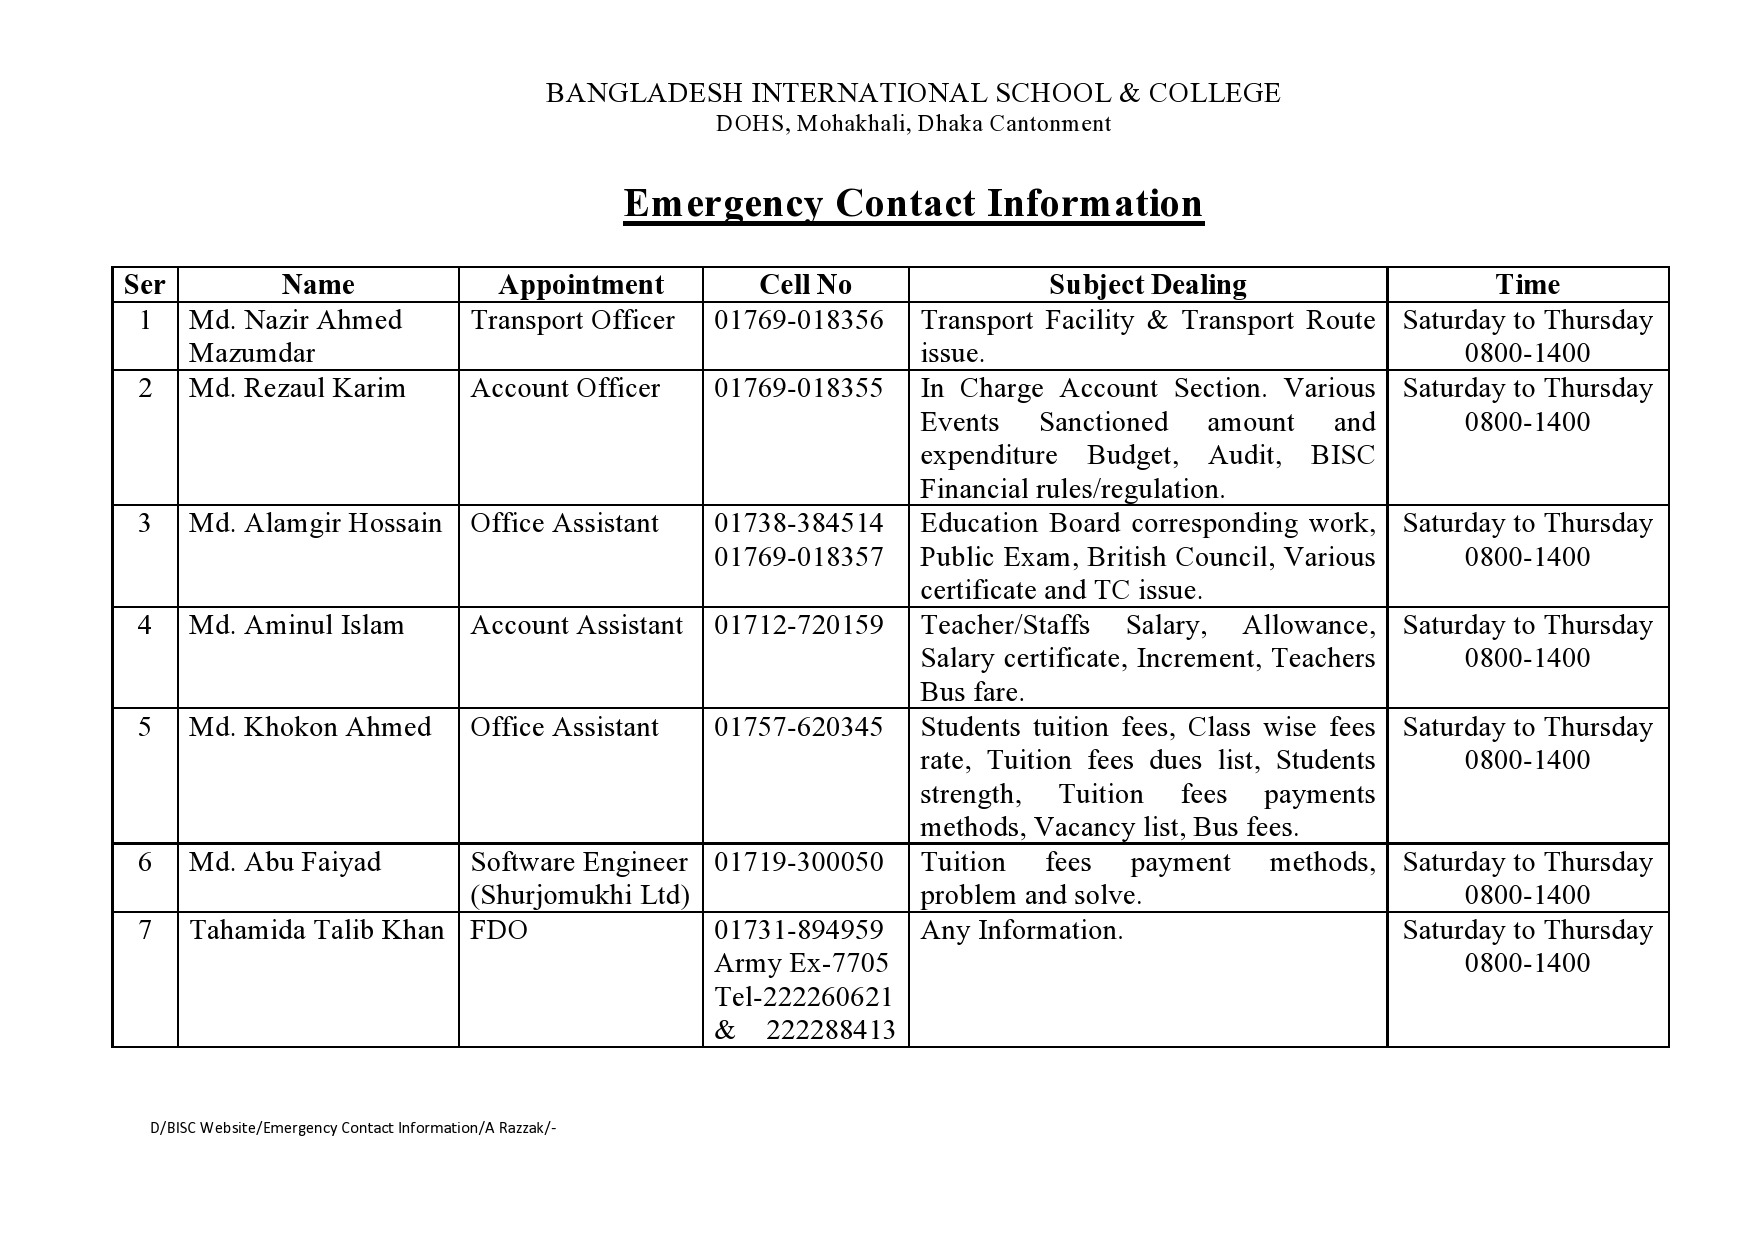 Emergency Contact information